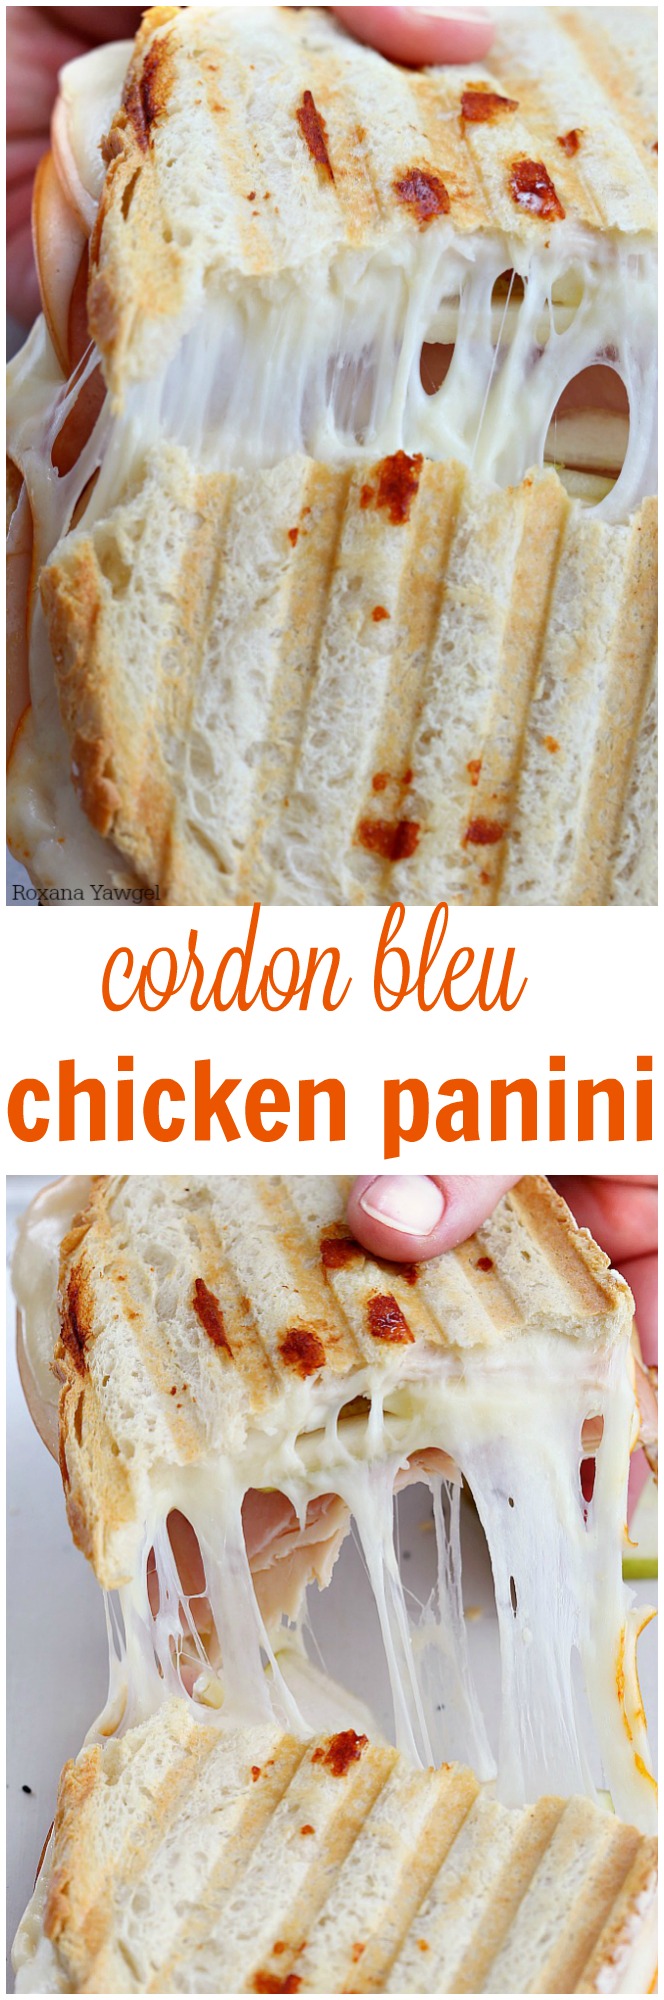 Packed with chicken and ham and two types of cheese, these Cordon bleu chicken panini prove that simple ingredients can easily be the most satisfying.